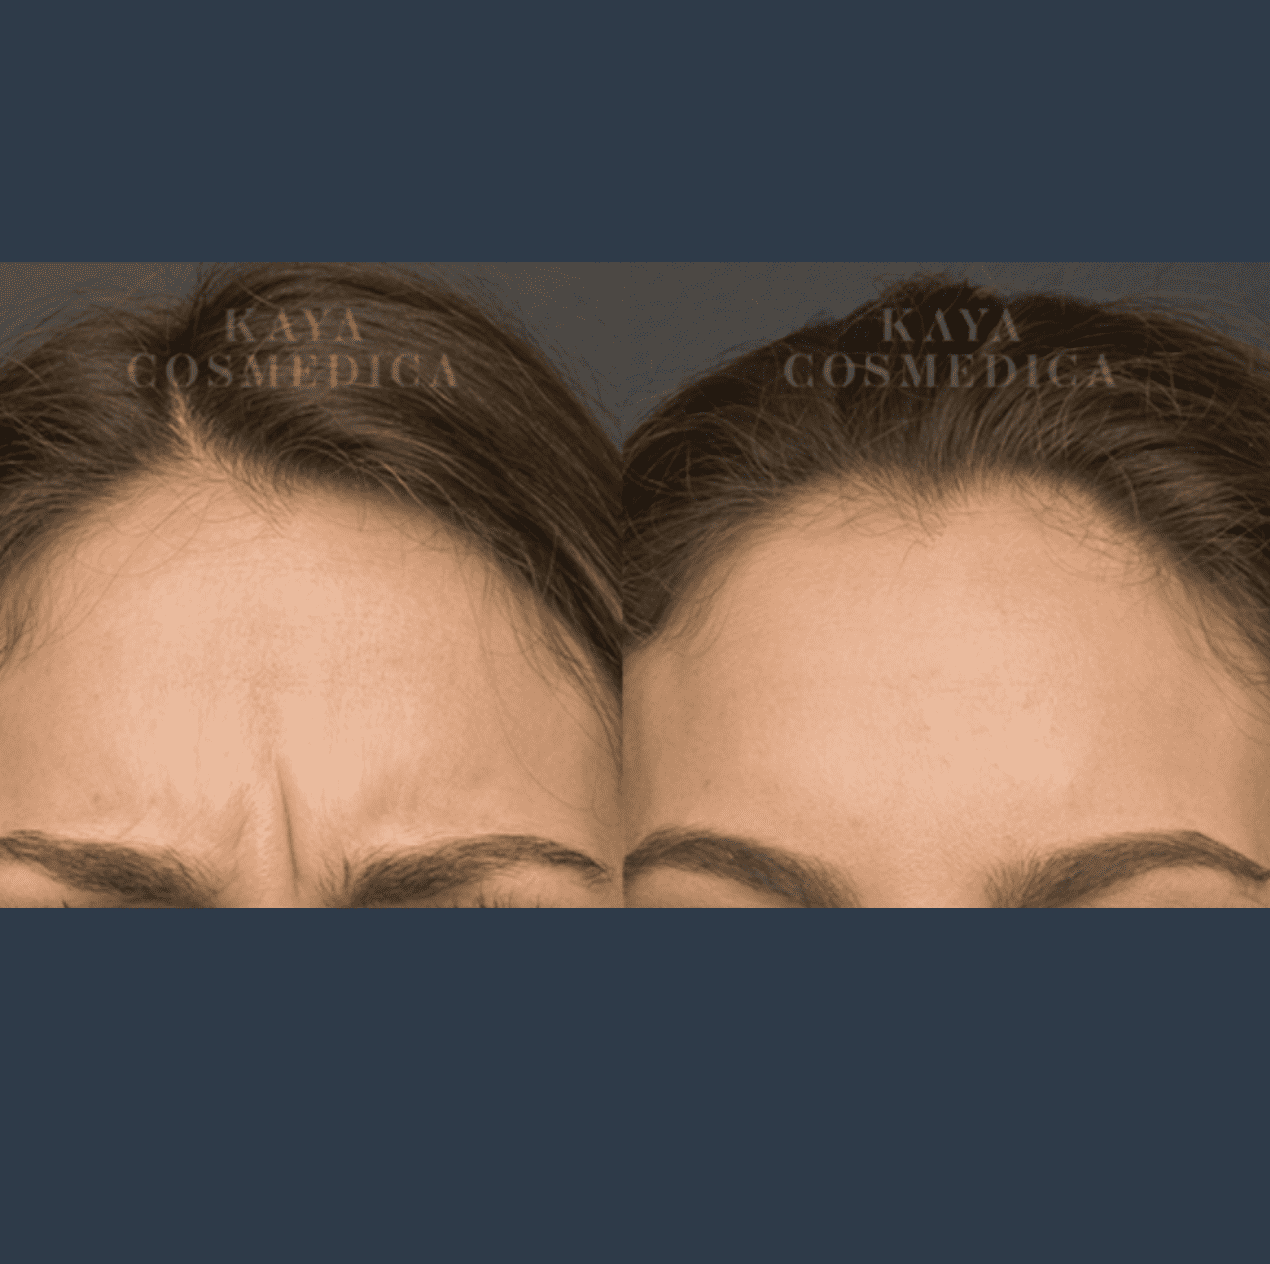 Close-up comparison of a woman's forehead before and after an anti-wrinkle cosmetic treatment, showing smoother skin and reduced wrinkles in the after image. Both images have "Kaya Cosmedica